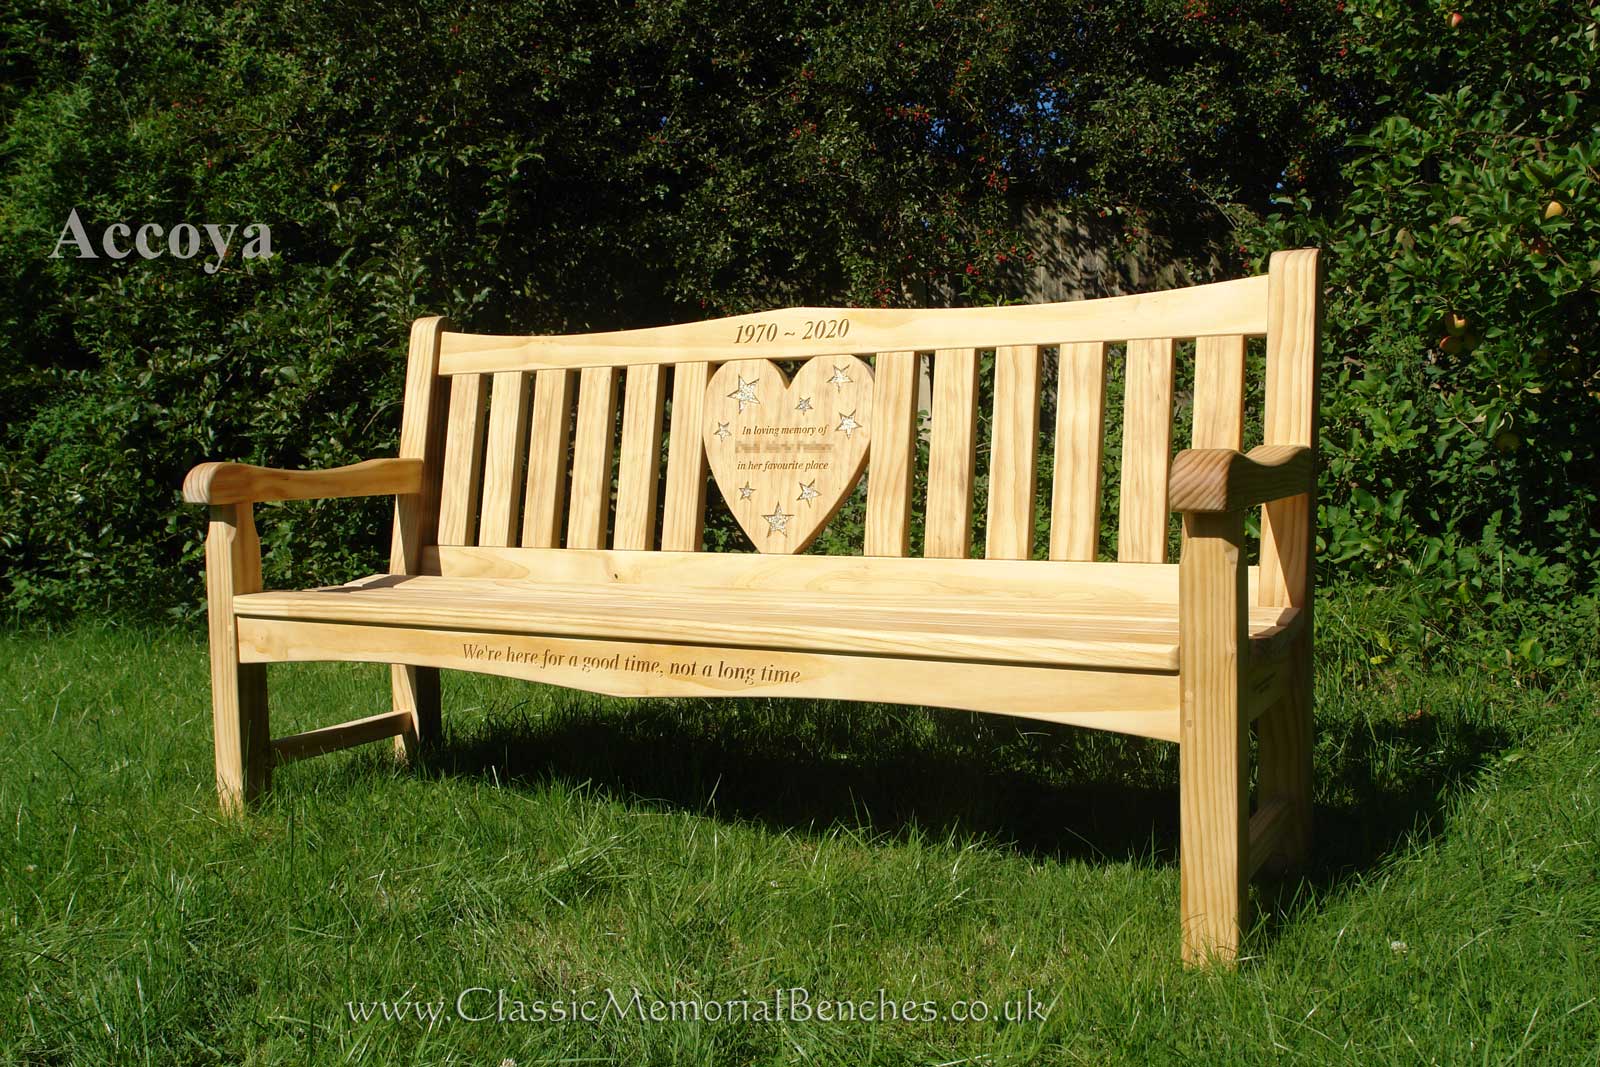 International Timber supplies Accoya timber to the Classic Garden Furniture Co.